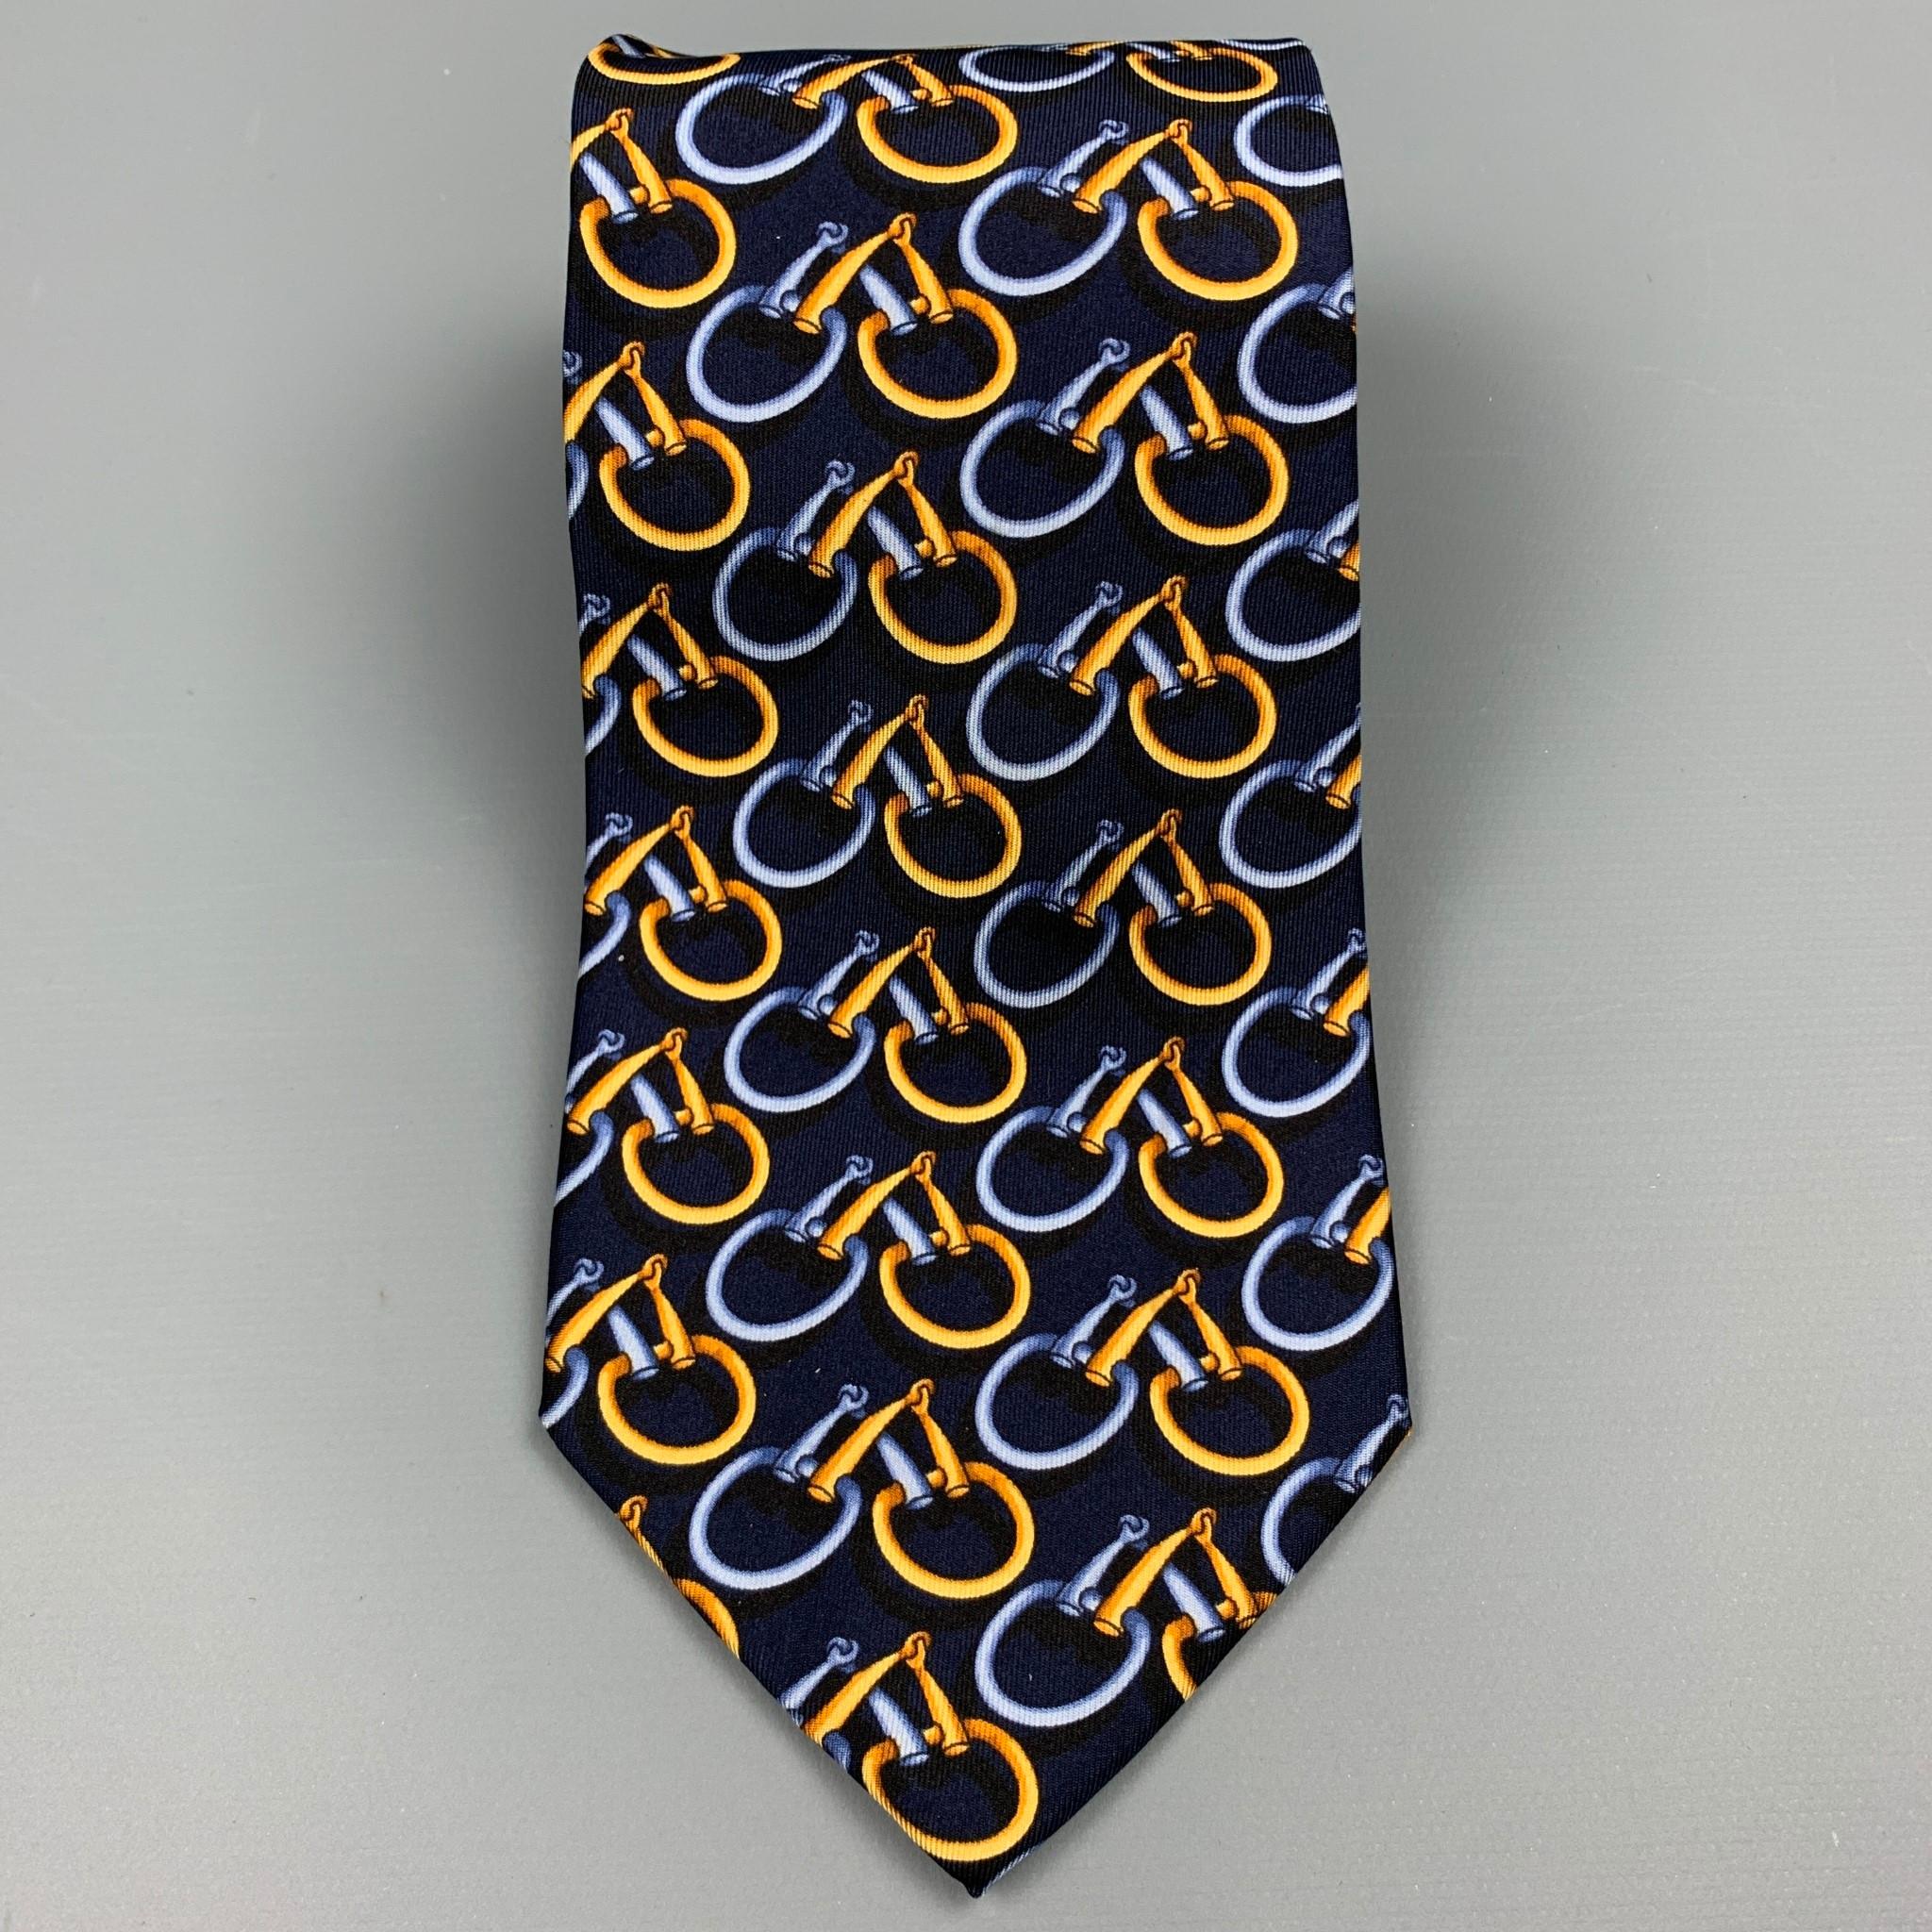 GUCCI neck tie comes in a navy & gold equestrian silk. Made in Italy.

Very Good Pre-Owned Condition.

Measurements:

Width: 3.5 in. 